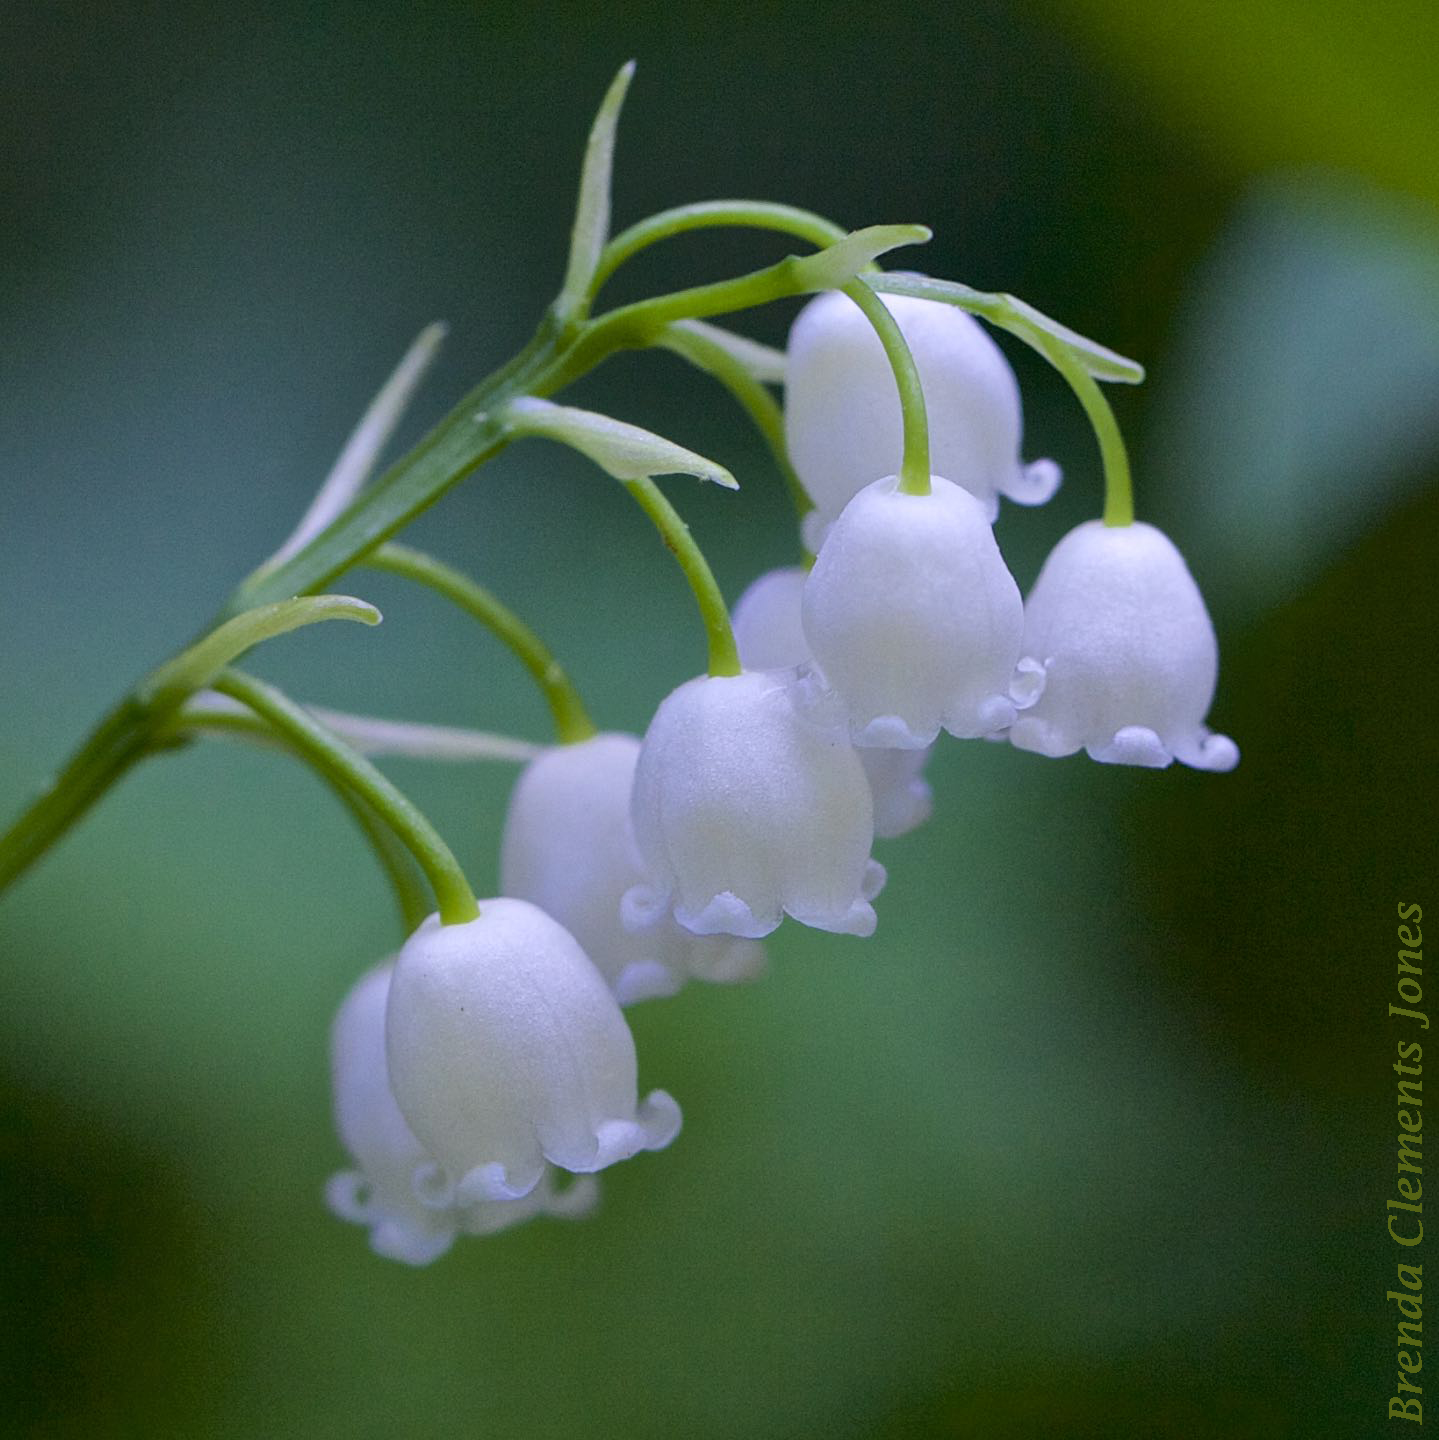 American Lily of the Valley